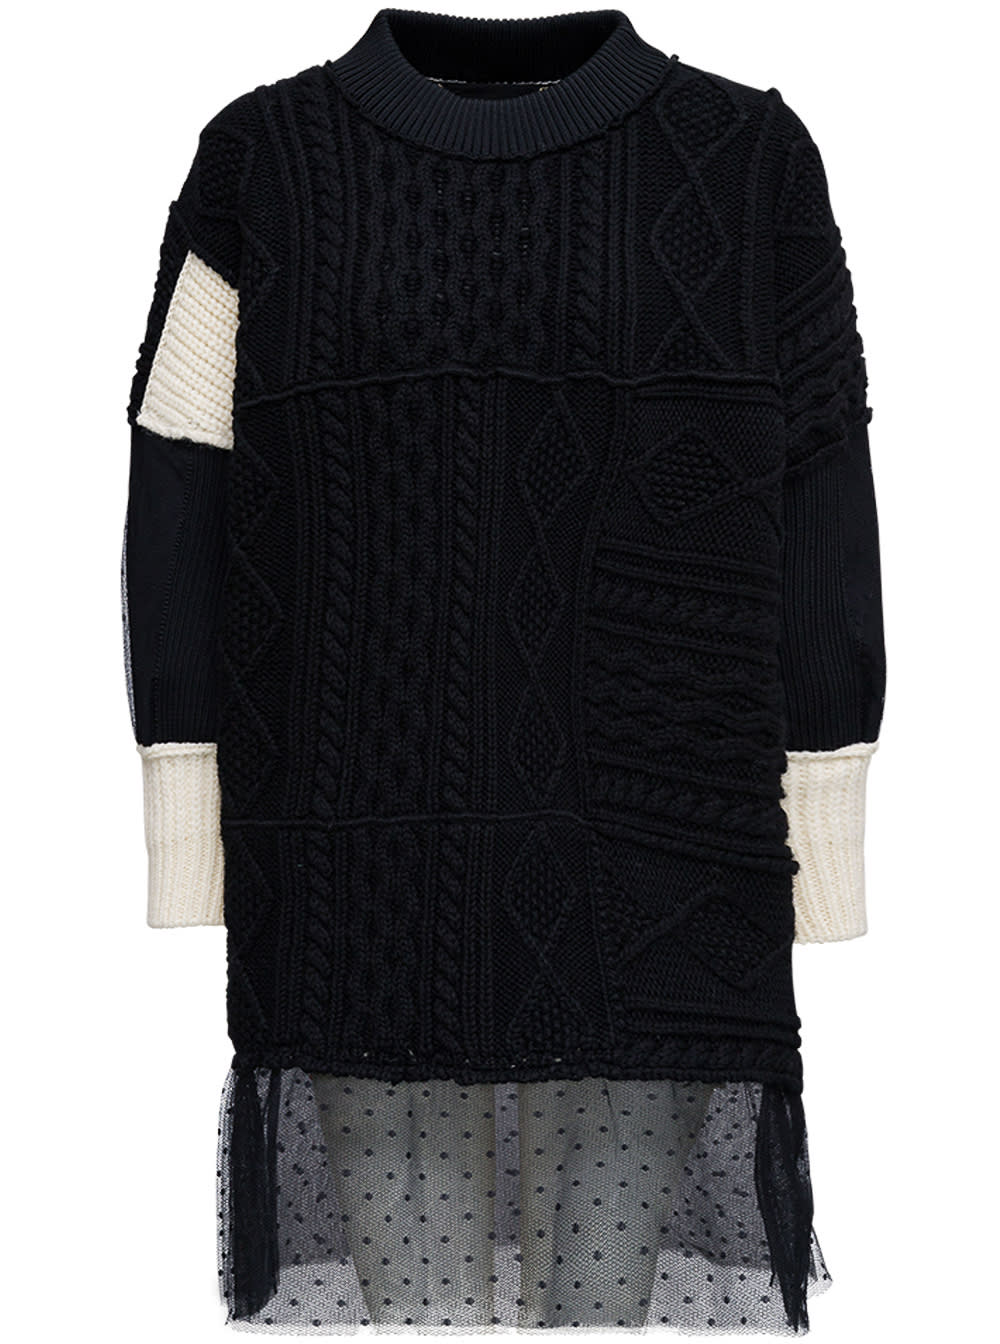 RED Valentino Black Wool Knit Dress With Red Writing